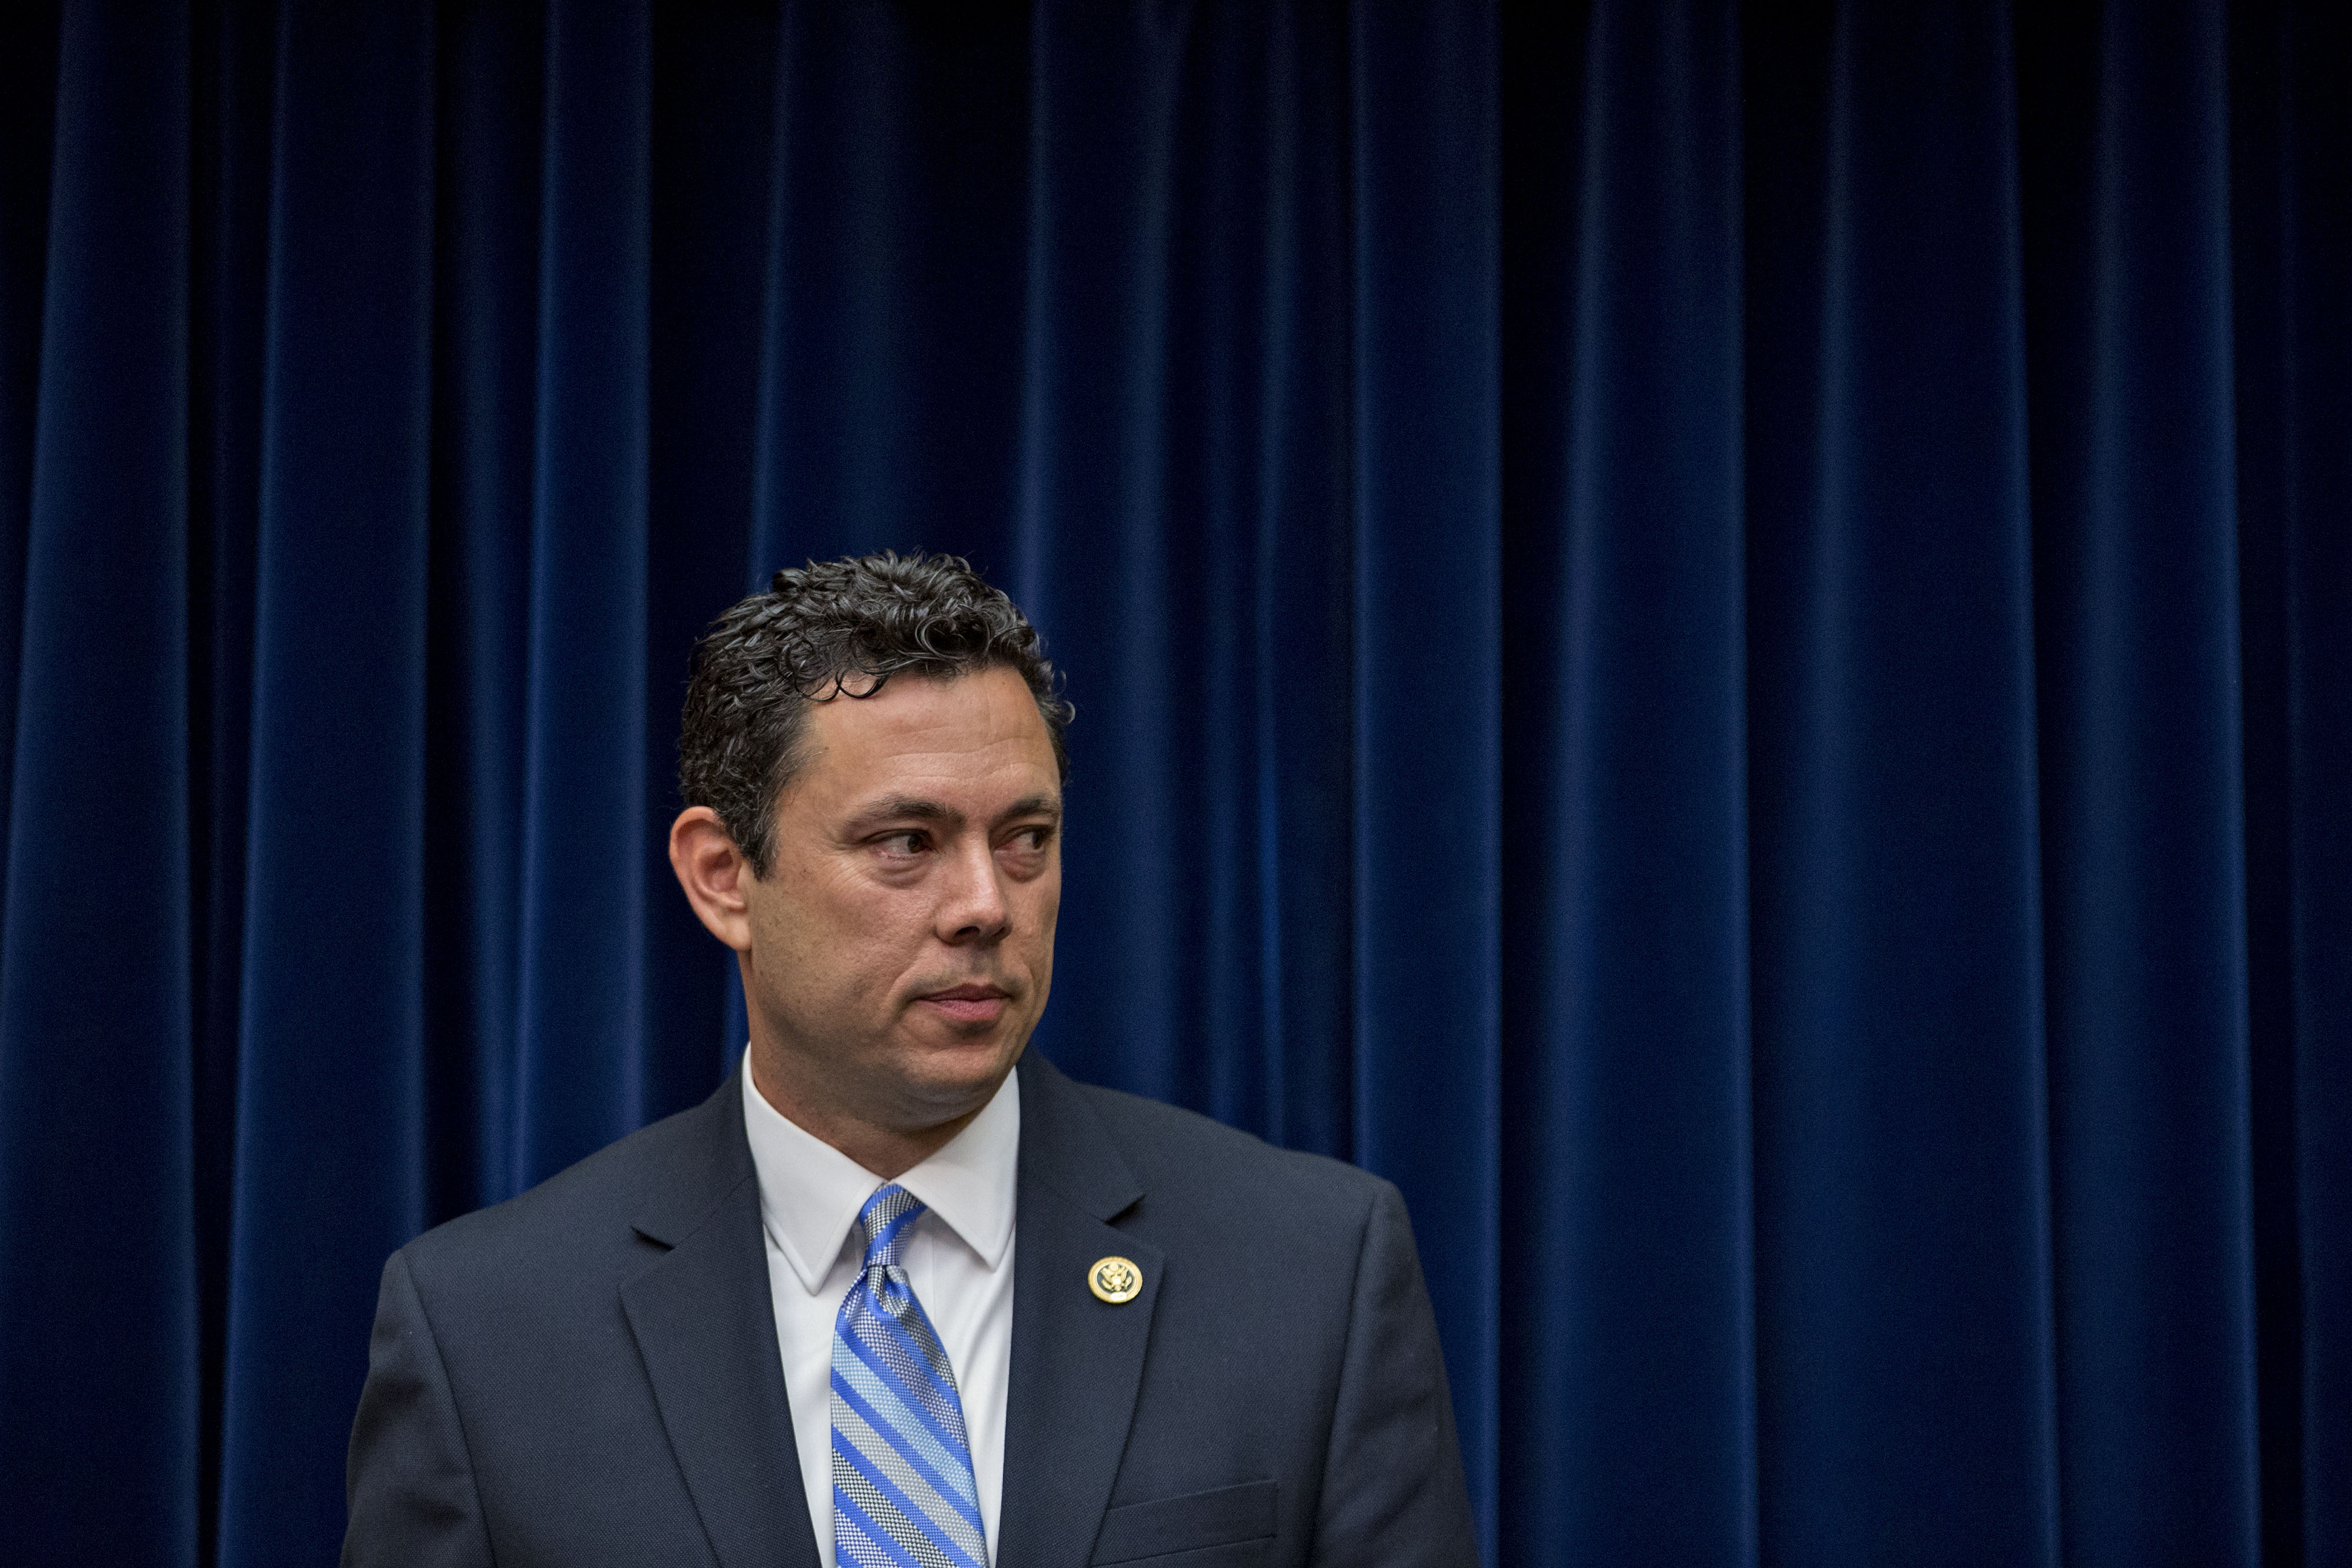 Rep. Jason Chaffetz, a Republican from Utah and chairman of the House Oversight and Government Reform Committee, waits to begin a hearing with then-FBI Director James Comey in Washington, D.C., on July 7, 2016. (Andrew Harrer—Bloomberg/Getty Images)